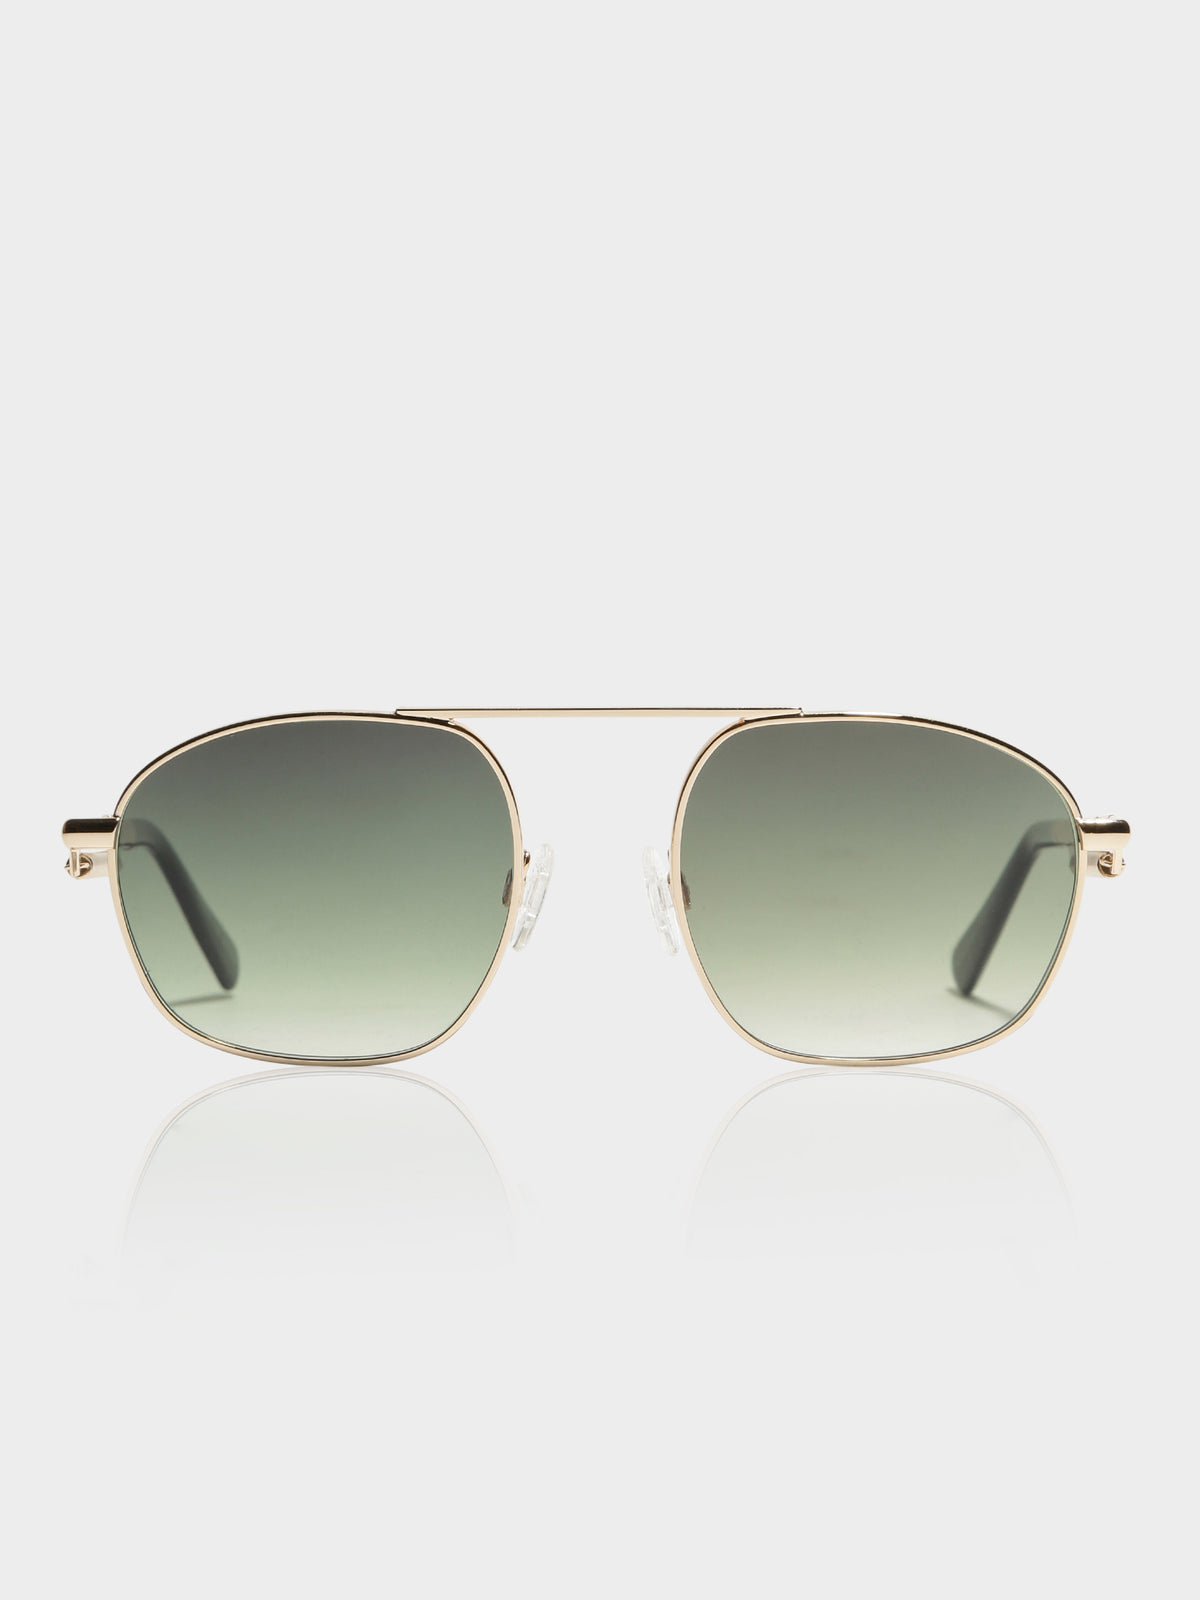 Solid sunglasses in Gold